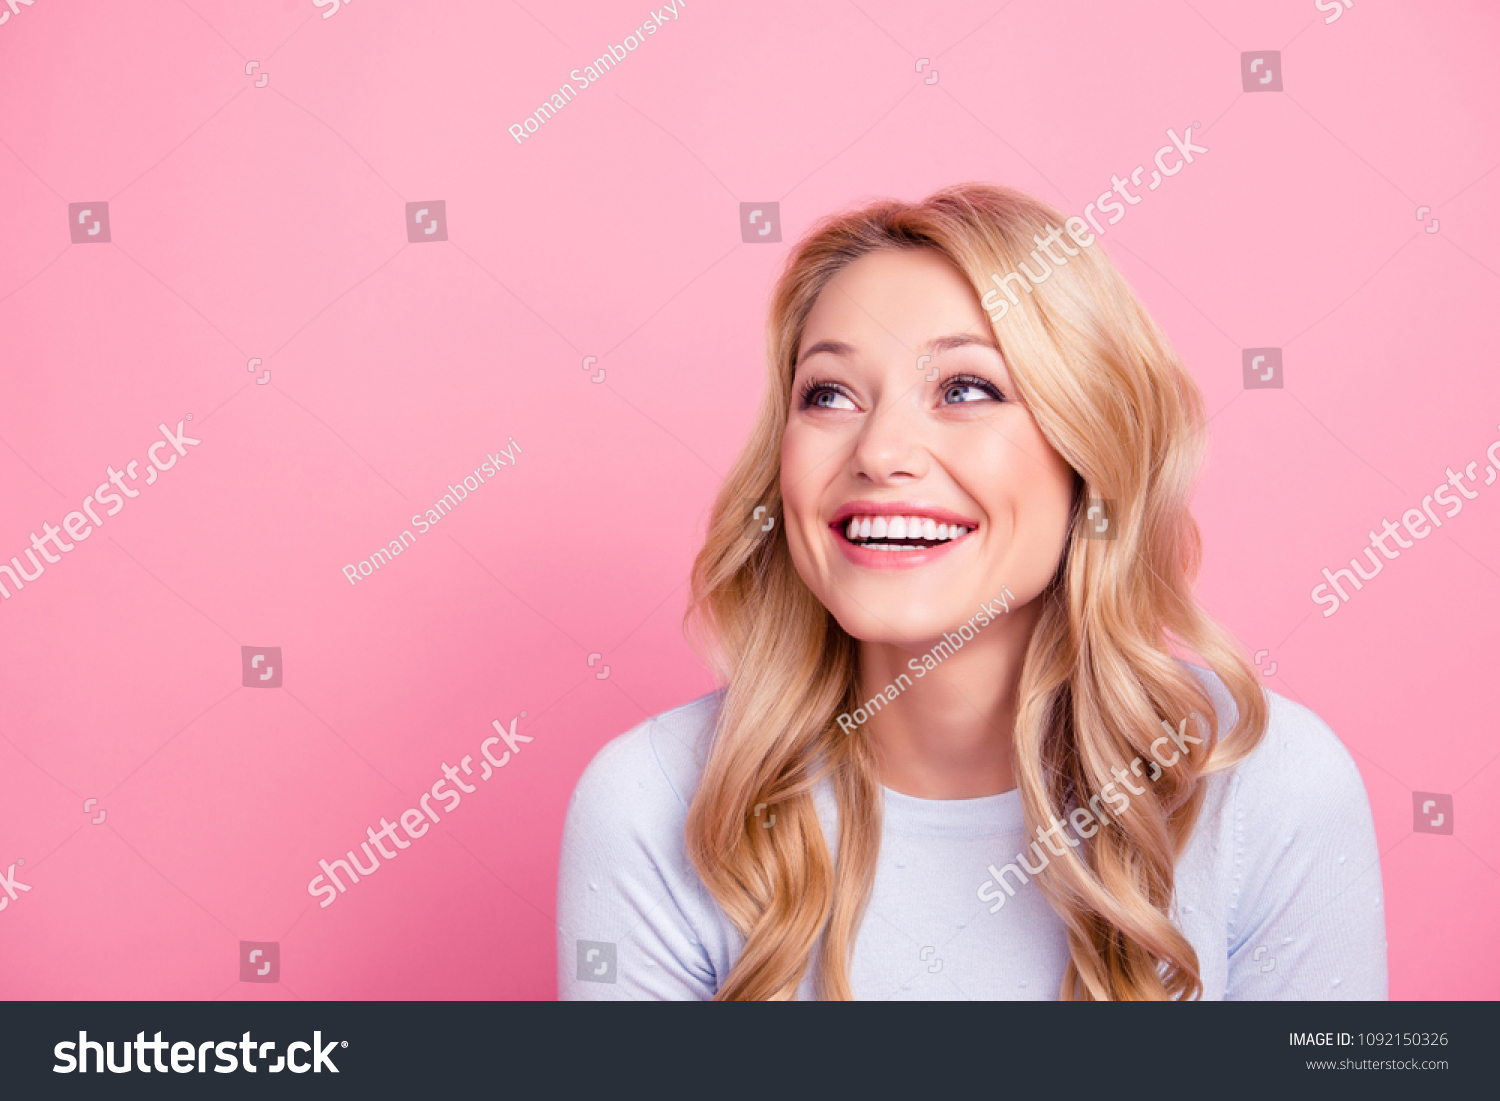 Portrait with empty place of foolish childish funny girl with modern hairdo beaming smile looking at copy space laughing isolated on pink background #1092150326